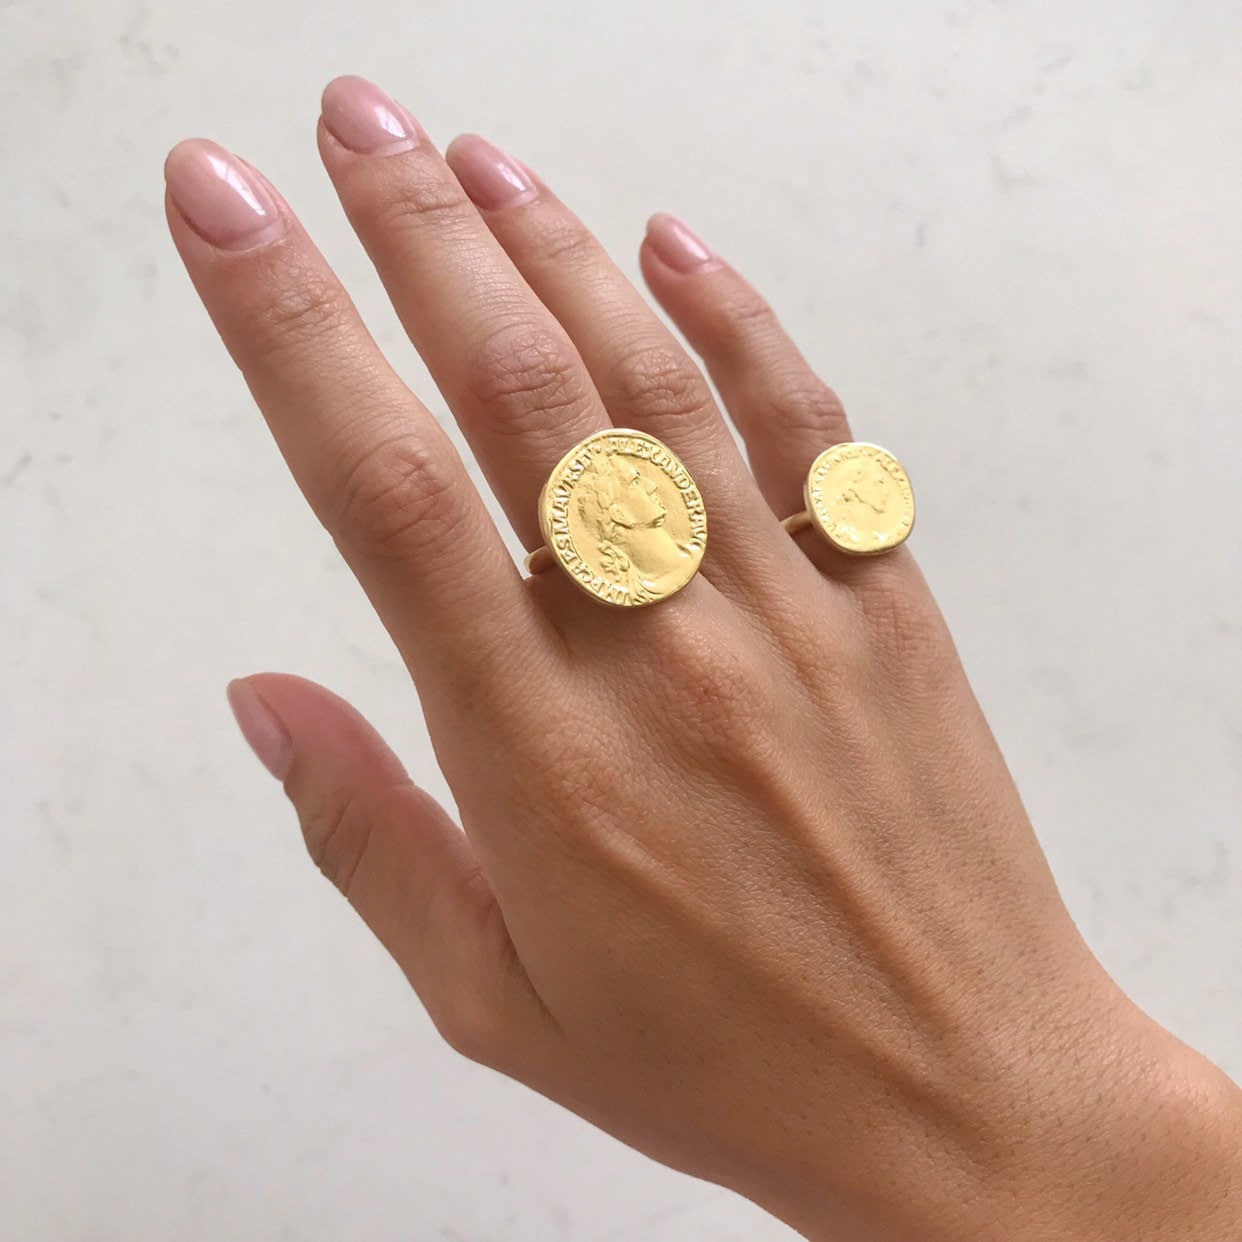 925 Sterling Silver Dollar Avatar Coin Open Rings For Women Fashionable Gold  Charms Cameo Jewelry S18101002 From Datai, $9.92 | DHgate.Com